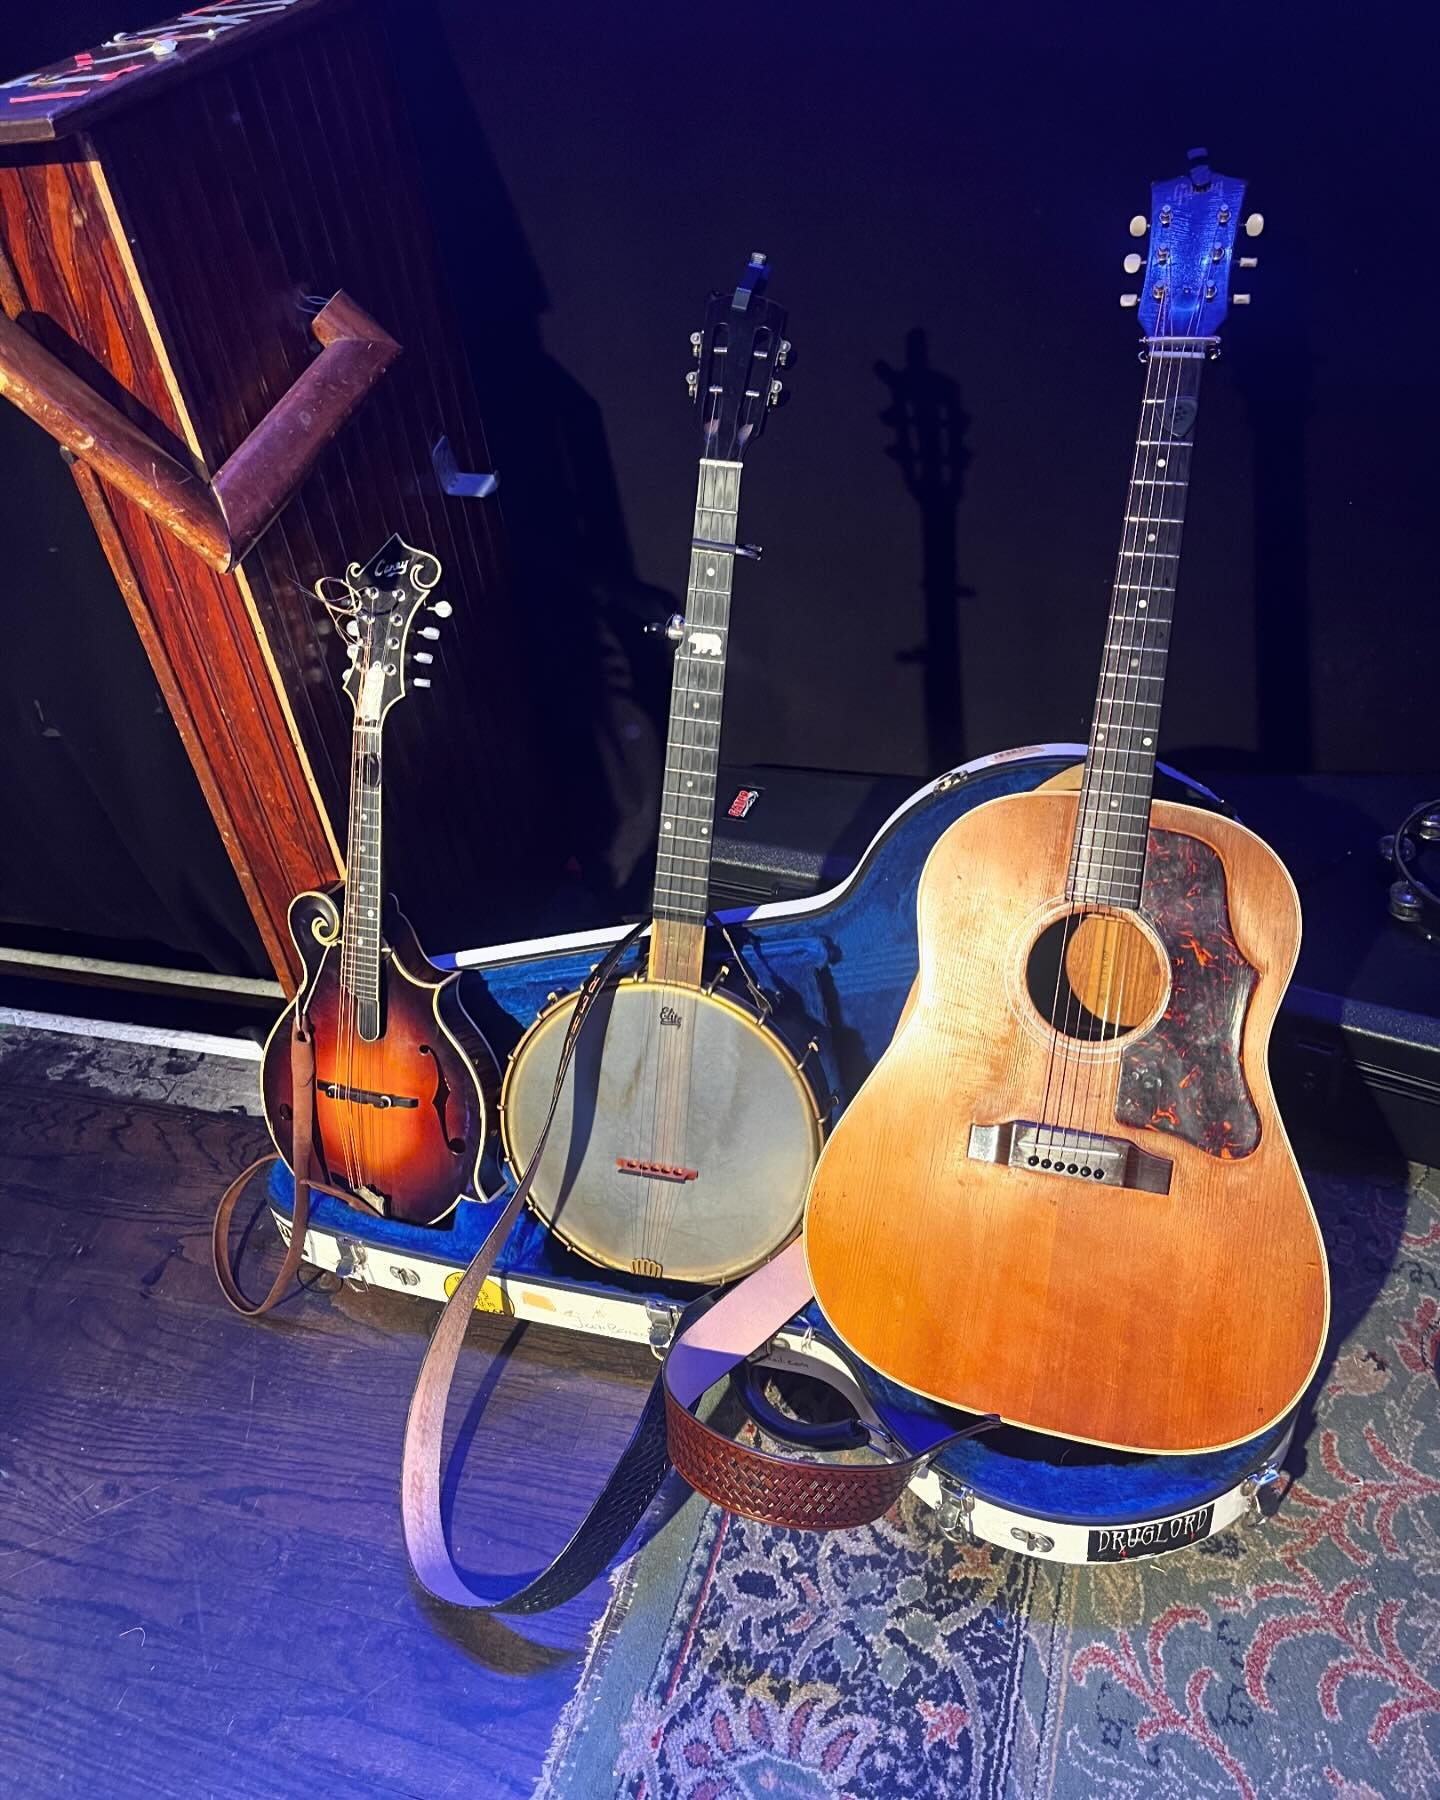 All the beauties are out for the Hot Seats Duo opening for @t_h_e__l_a_n_g_a_n__b_a_n_d this evening at @richmondmusichall !

#transatlantic #stringband